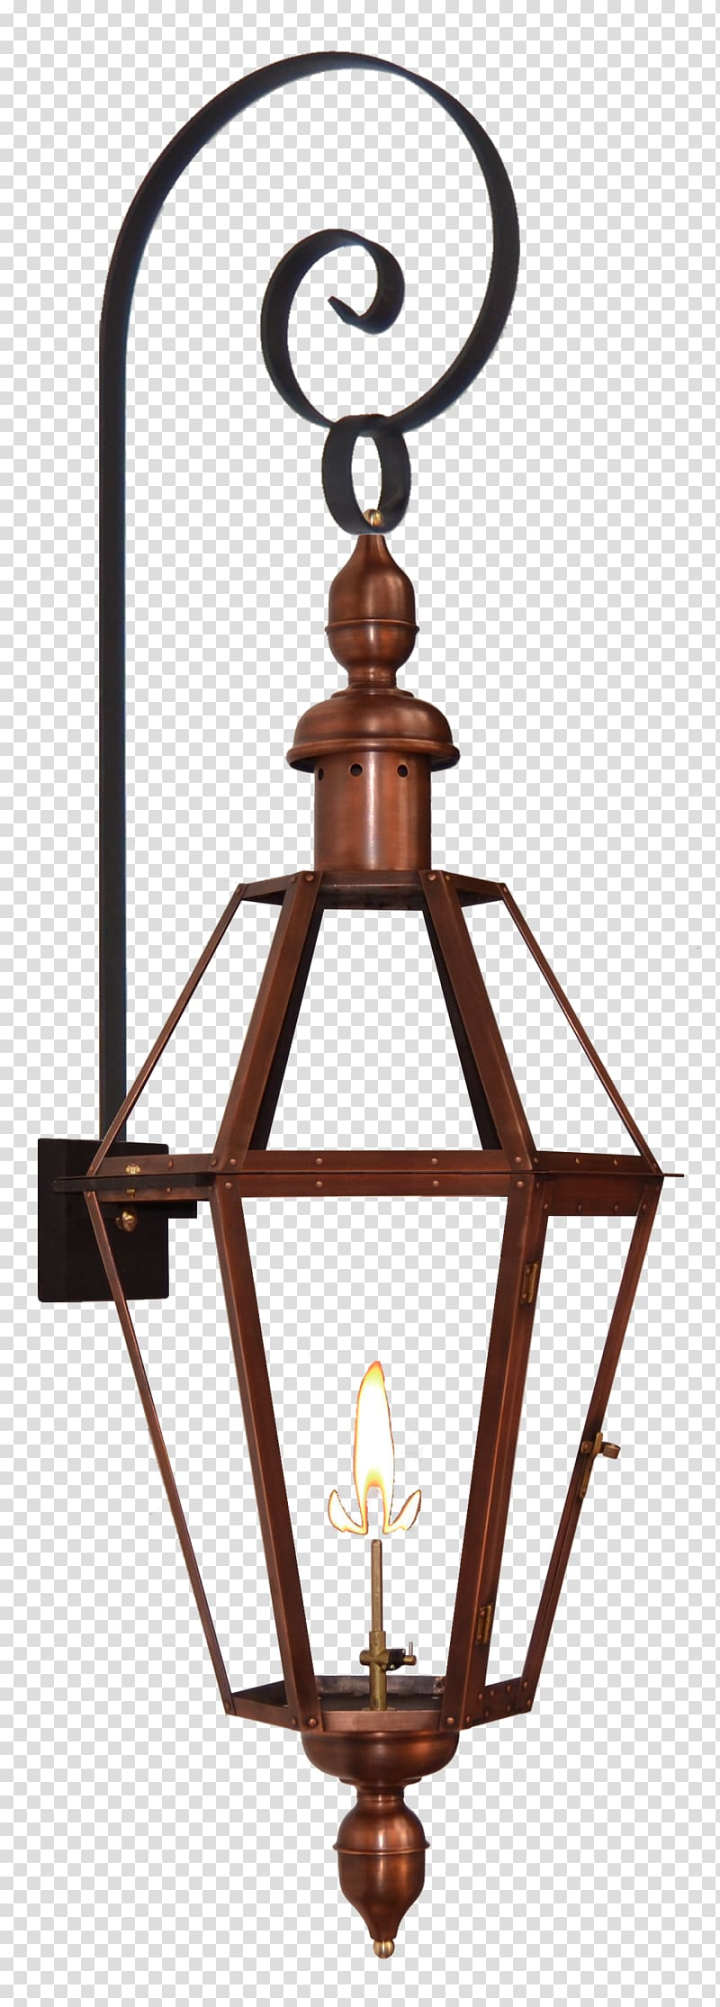 light,fixture,paper,lantern,gas,lighting,glass,street light,lamp,led lamp,electricity,landscape lighting,scroll,nature,mount,bottom,lamp shades,incandescent light bulb,coppersmith,ceiling fixture,candle holder,vernon,light fixture,paper lantern,gas lighting,png clipart,free png,transparent background,free clipart,clip art,free download,png,comhiclipart